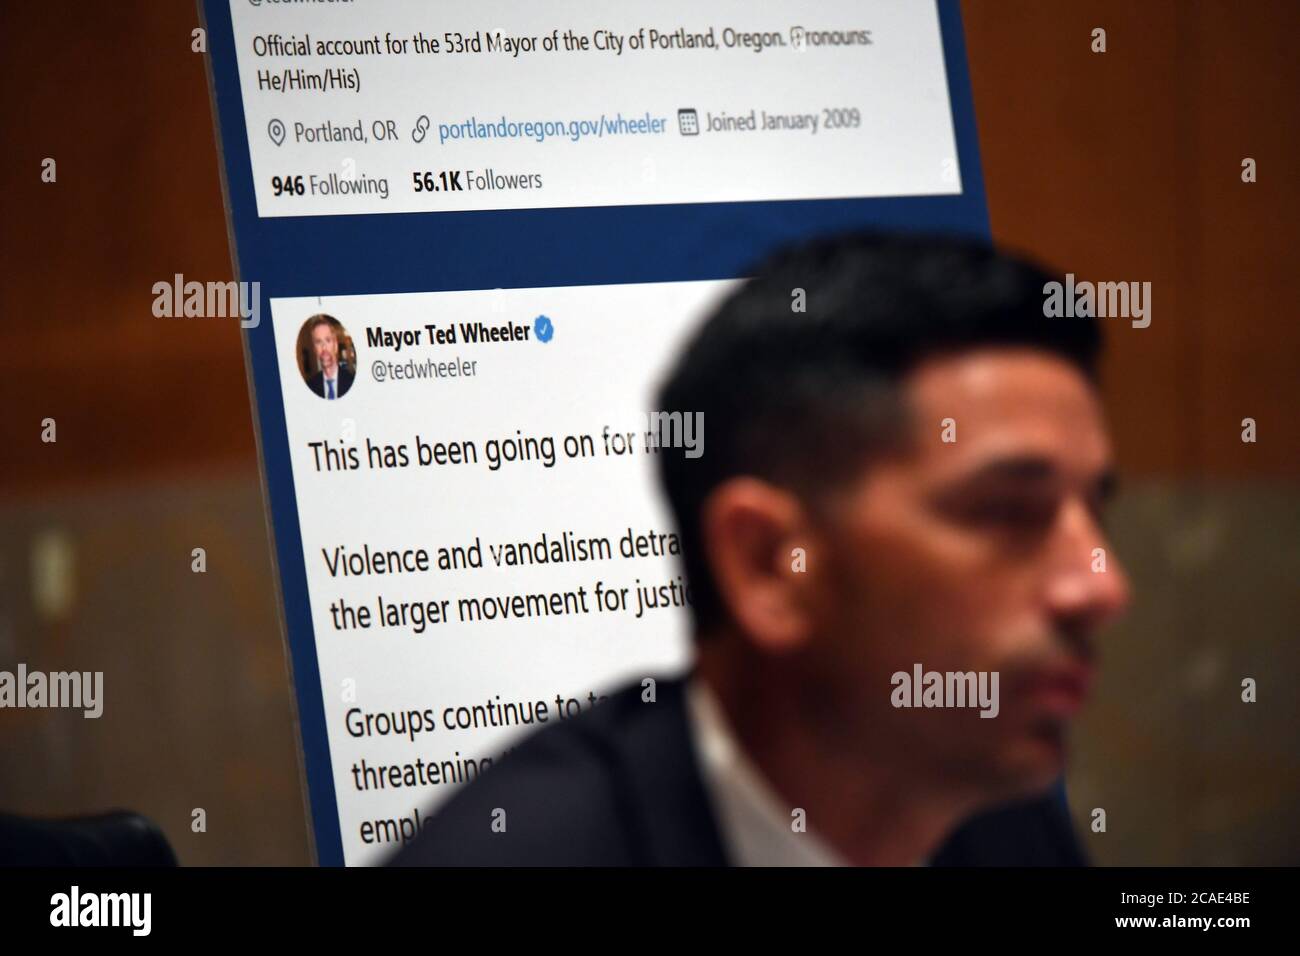 The tweets from Portland Mayor Ted Wheeler are displayed behind acting United States Secretary of Homeland Security Chad F. Wolf, who is appearing before the US Senate Homeland Security and Governmental Affairs Committee on August 6, 2020 in Washington, DC to explain the use of federal agents during protests in Portland, Oregon. Credit: Toni Sandys/Pool via CNP | usage worldwide Stock Photo